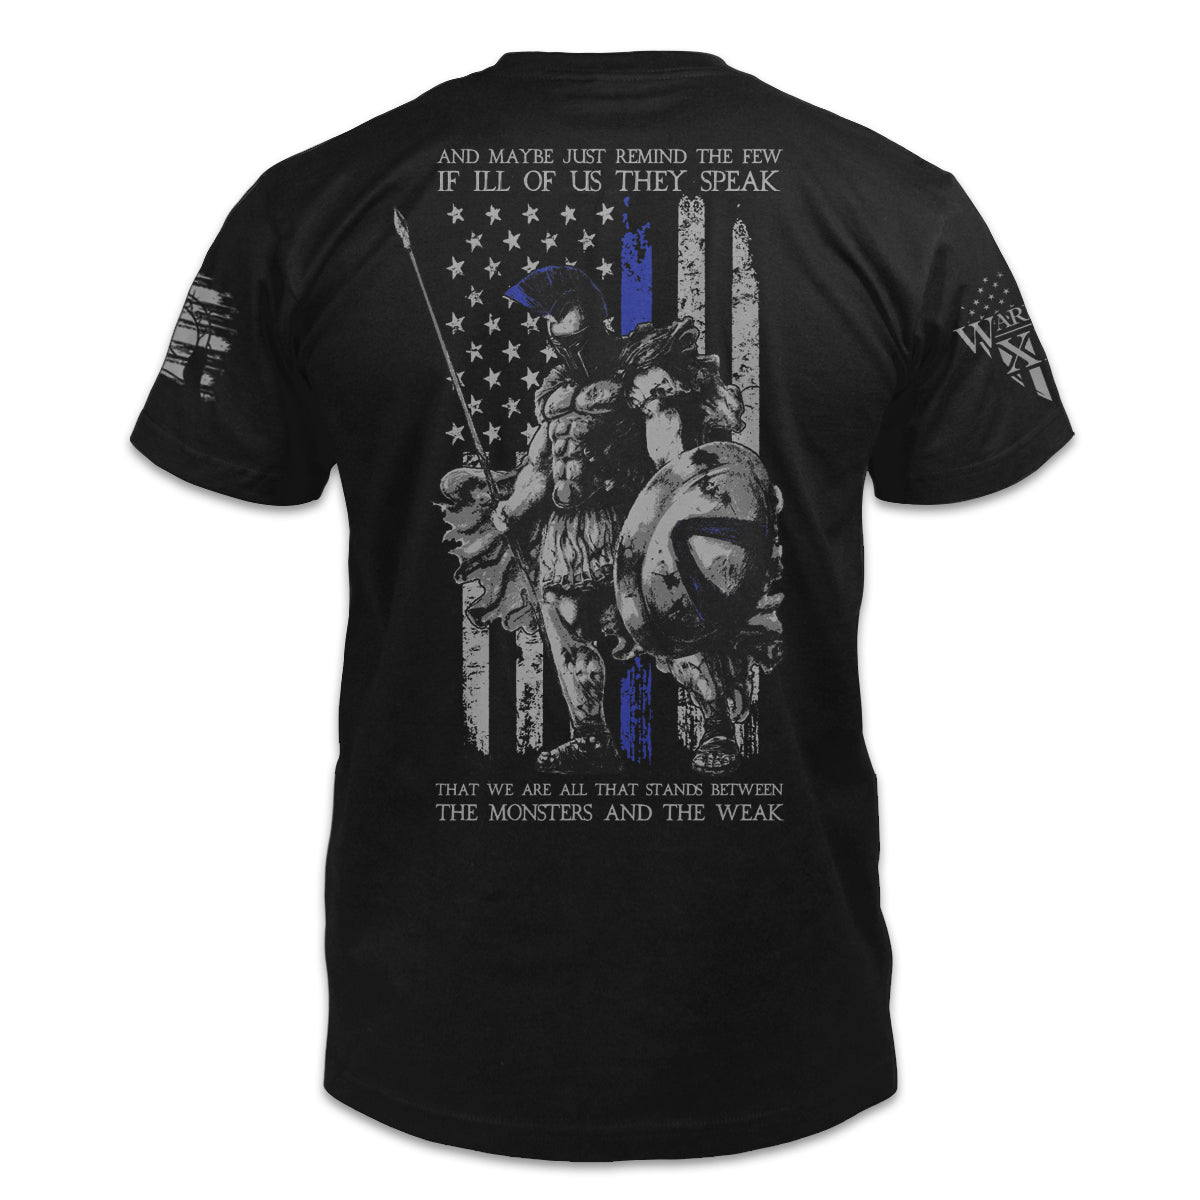 A black t-shirt with an "American Spartan" thin blue line printed on the back of the shirt.